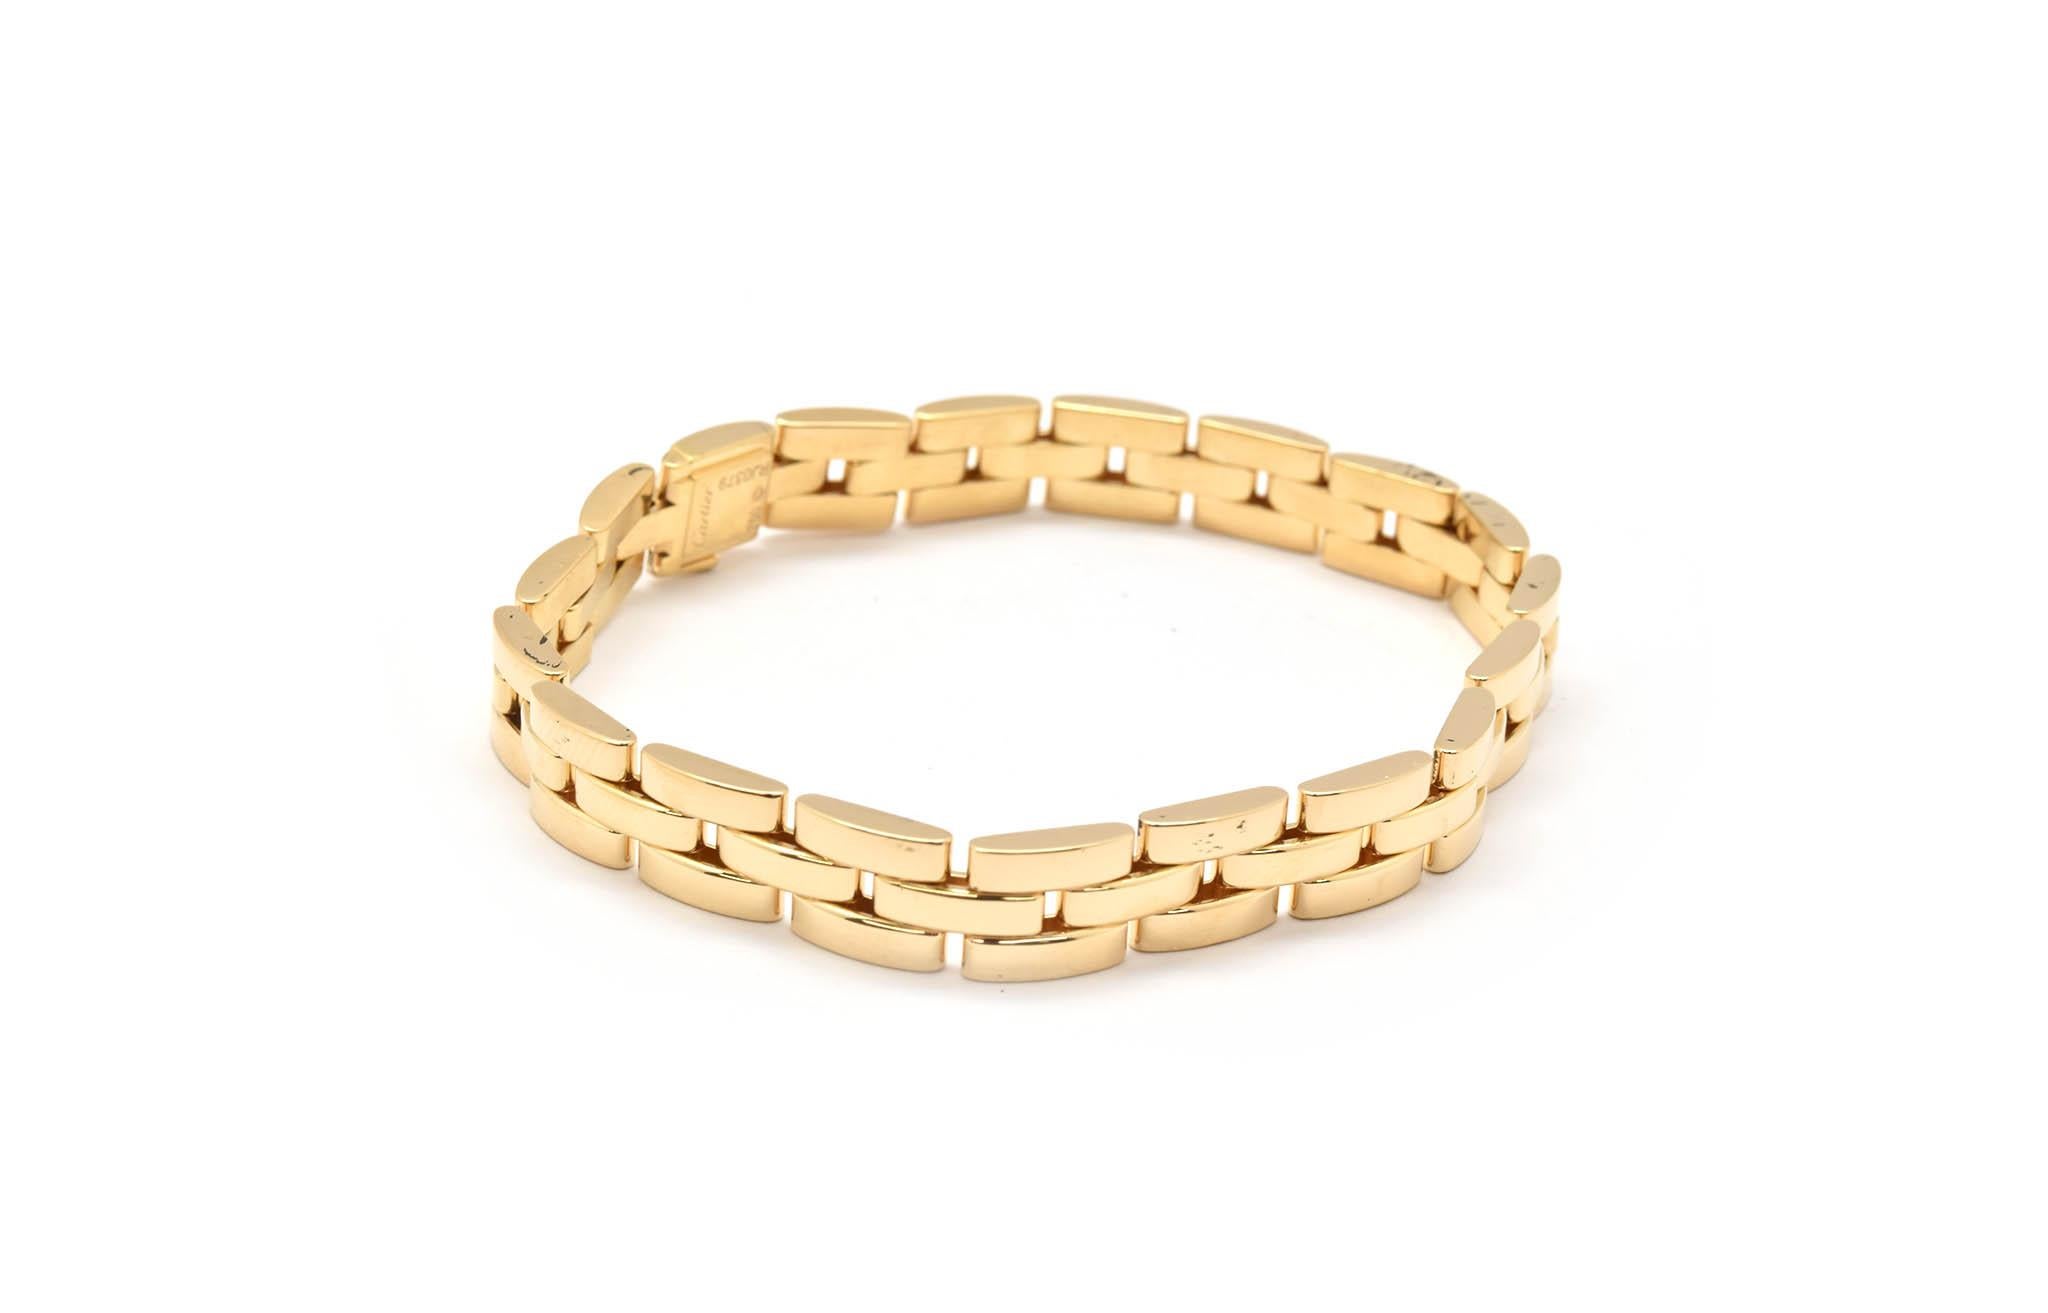 This is a vintage Cartier Maillon Panthere bracelet made from 18k yellow gold! This bracelet is from the Panthere de Cartier Bracelet Collection. Hallmarked on the bracelet, is “Cartier”, “750” and the serial number from Cartier. The bracelet